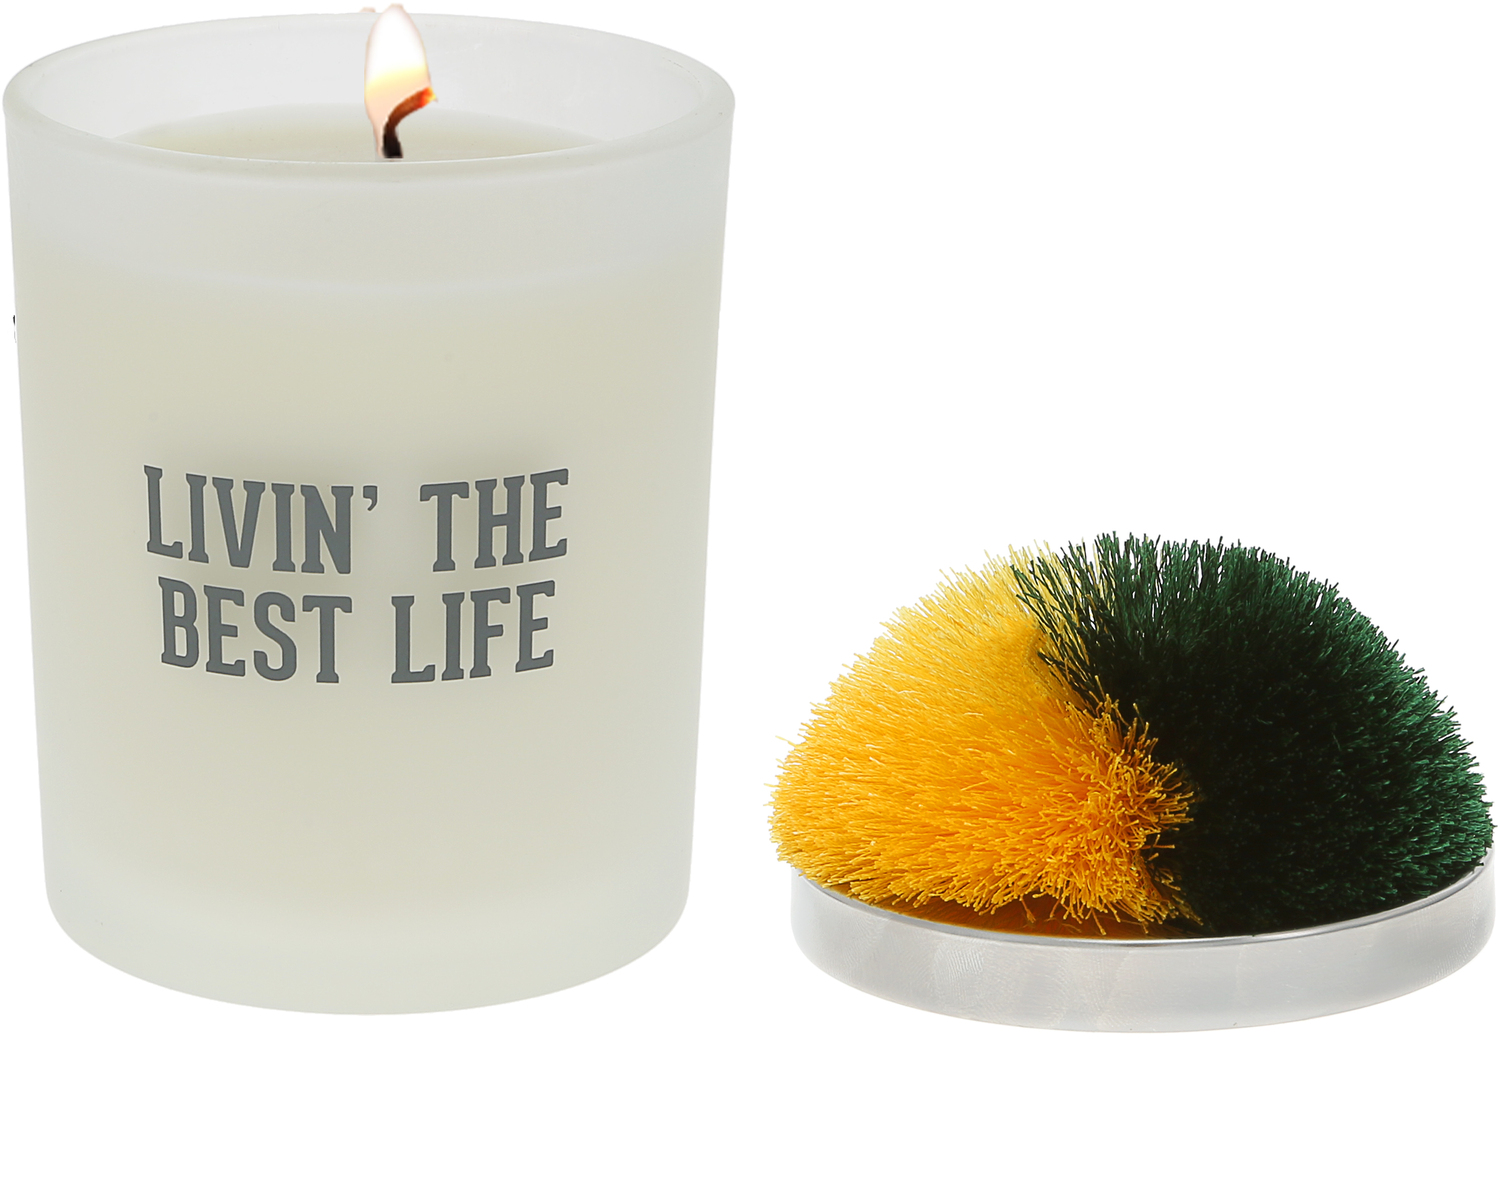 Best Life - Green & Yellow by Repre-Scent - Best Life - Green & Yellow - 5.5 oz - 100% Soy Wax Candle with Pom Pom Lid
Scent: Tranquility